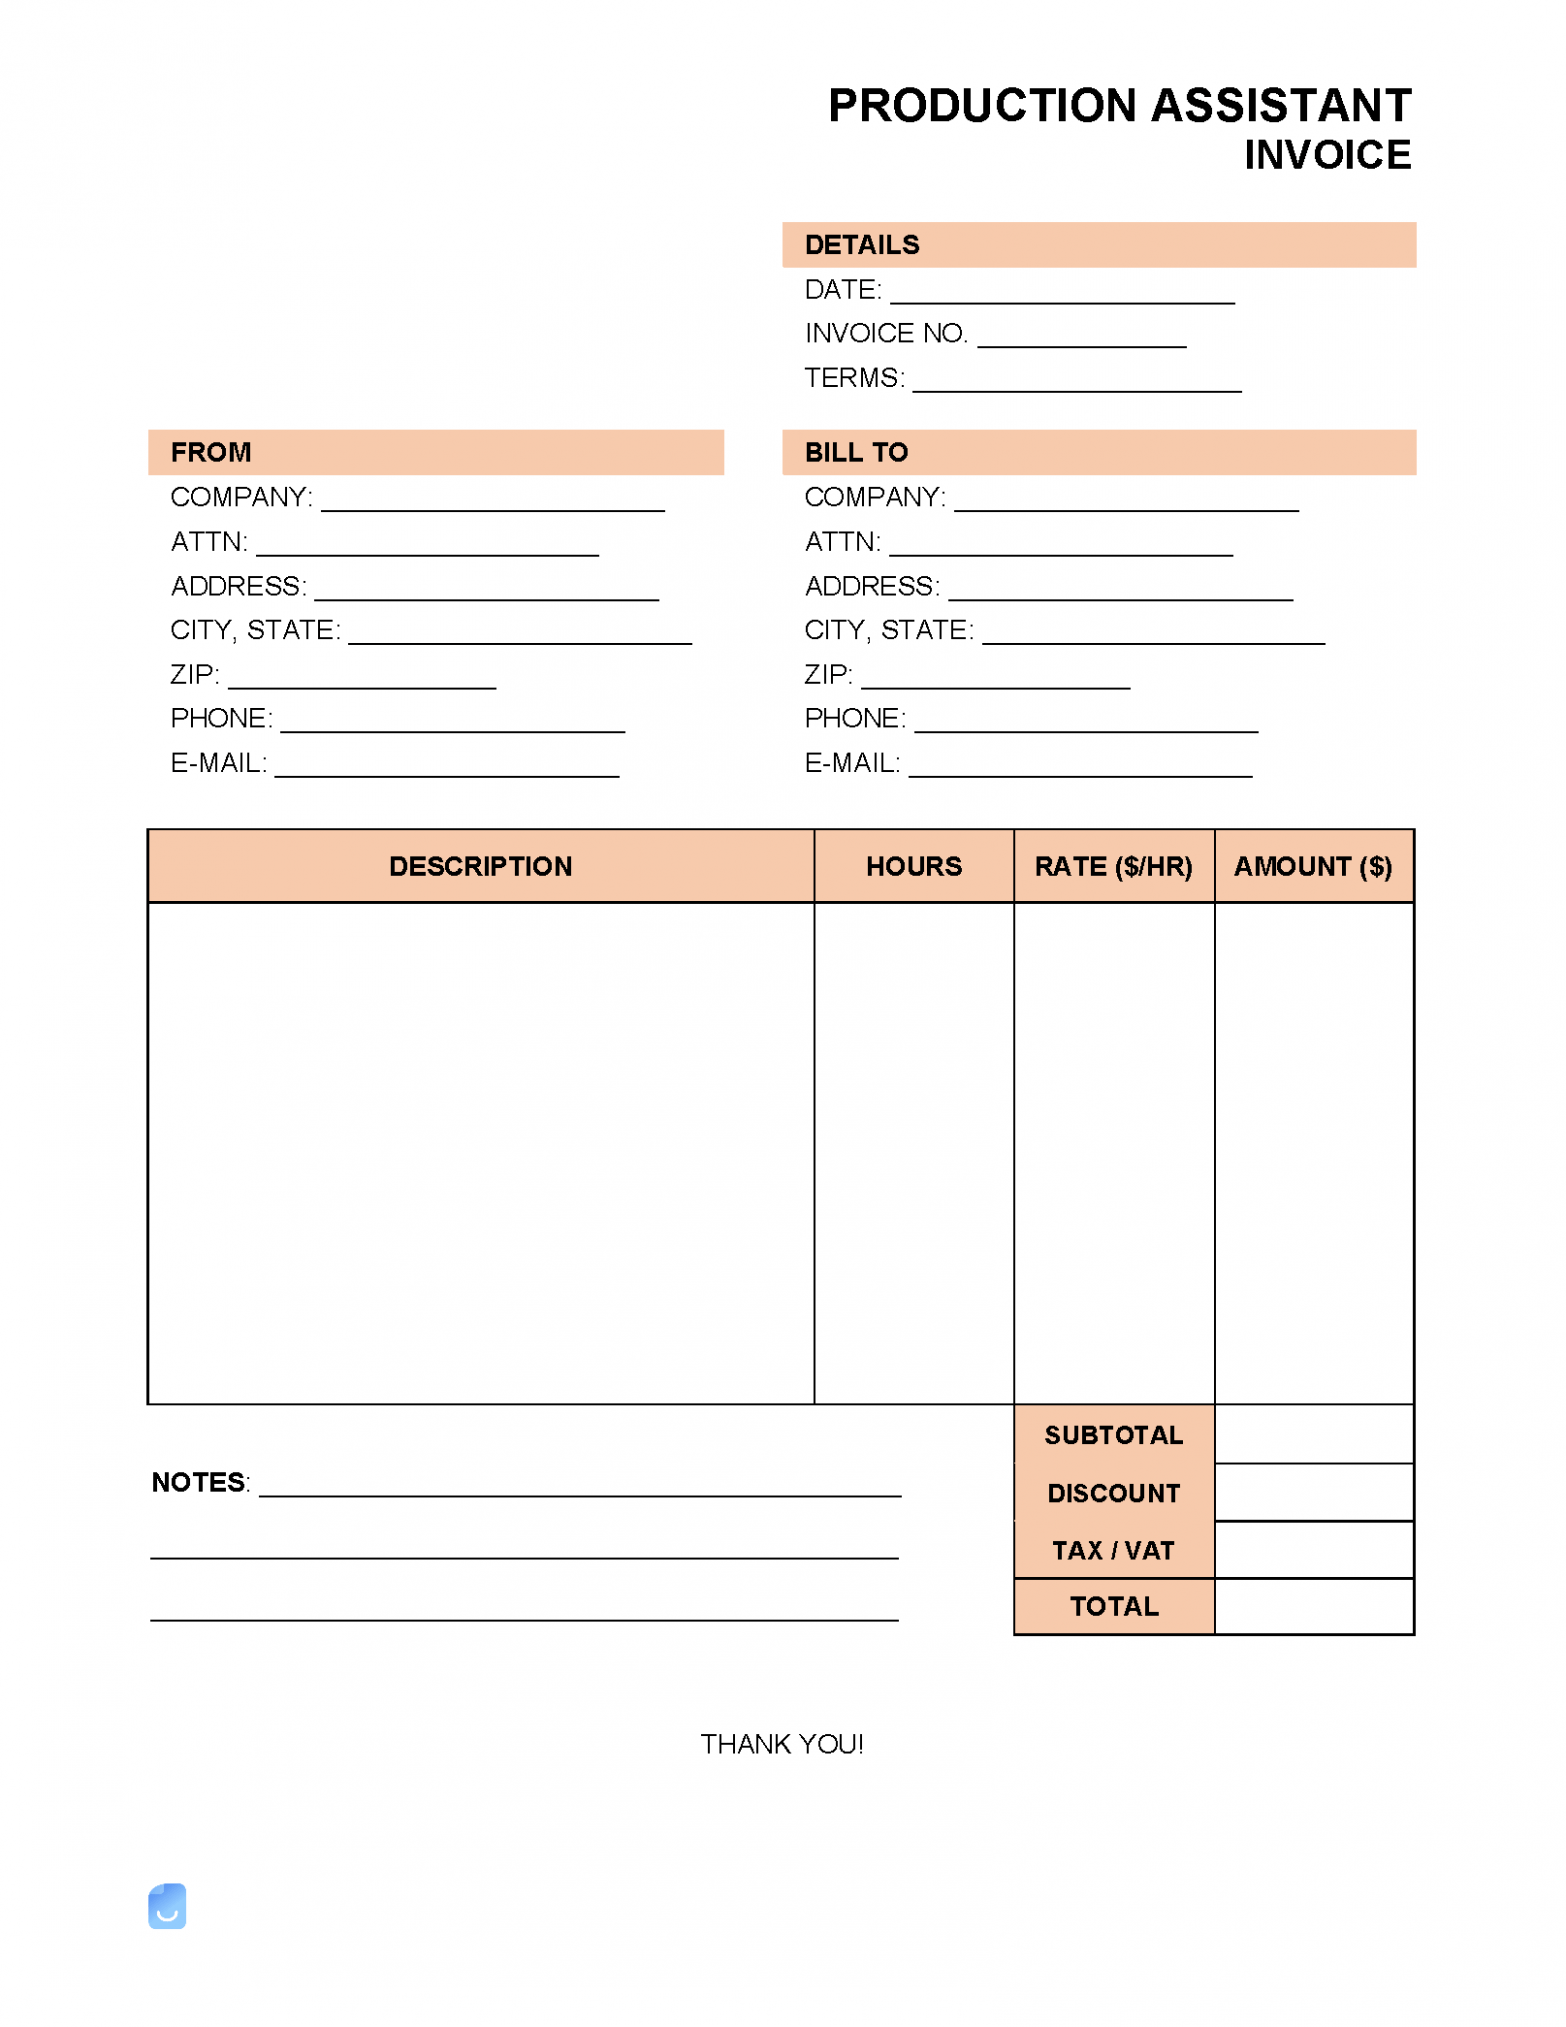 Editable Production Assistant Invoice Template 